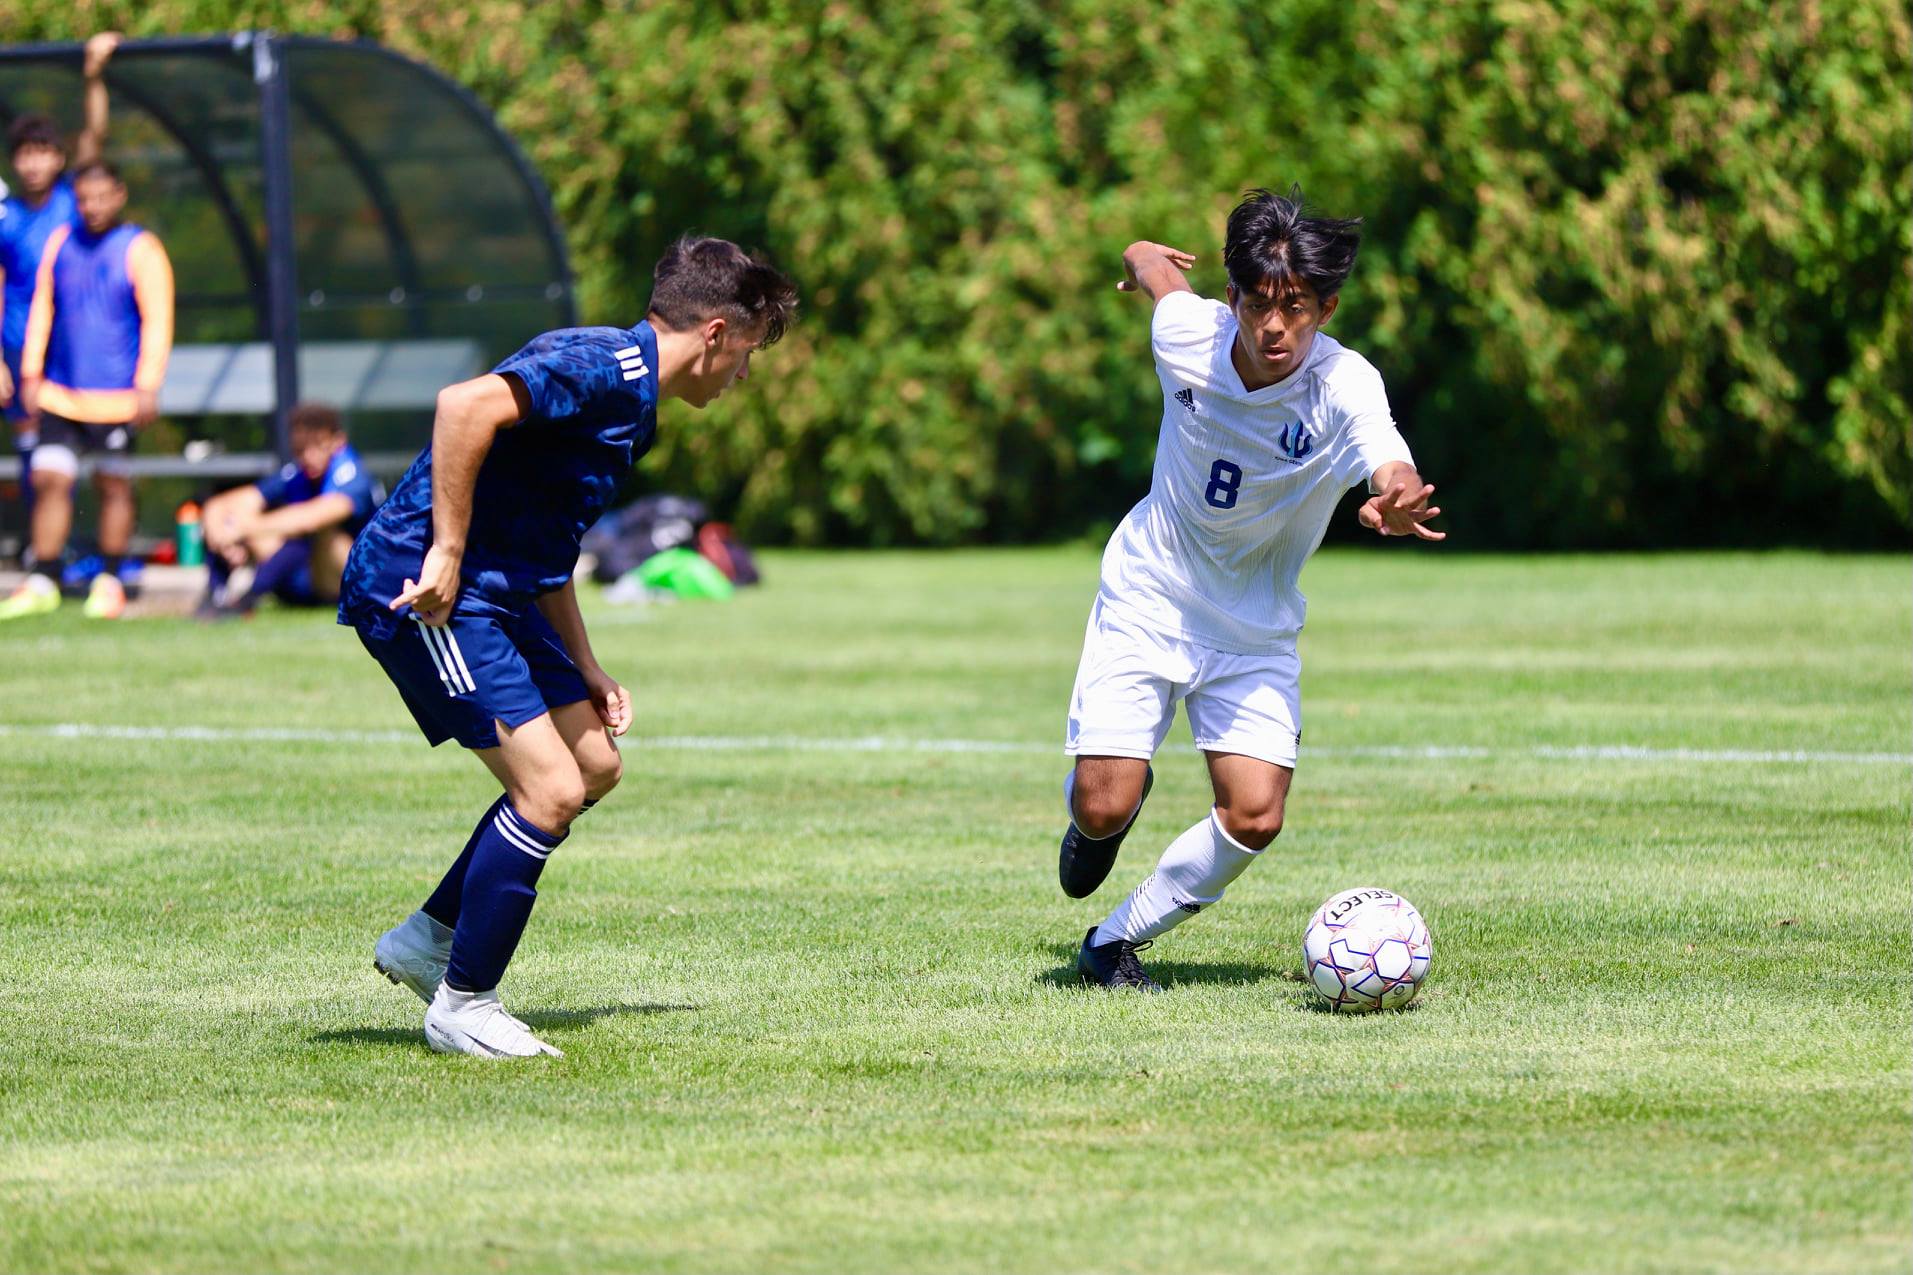 Third straight win for Iowa Central men's soccer